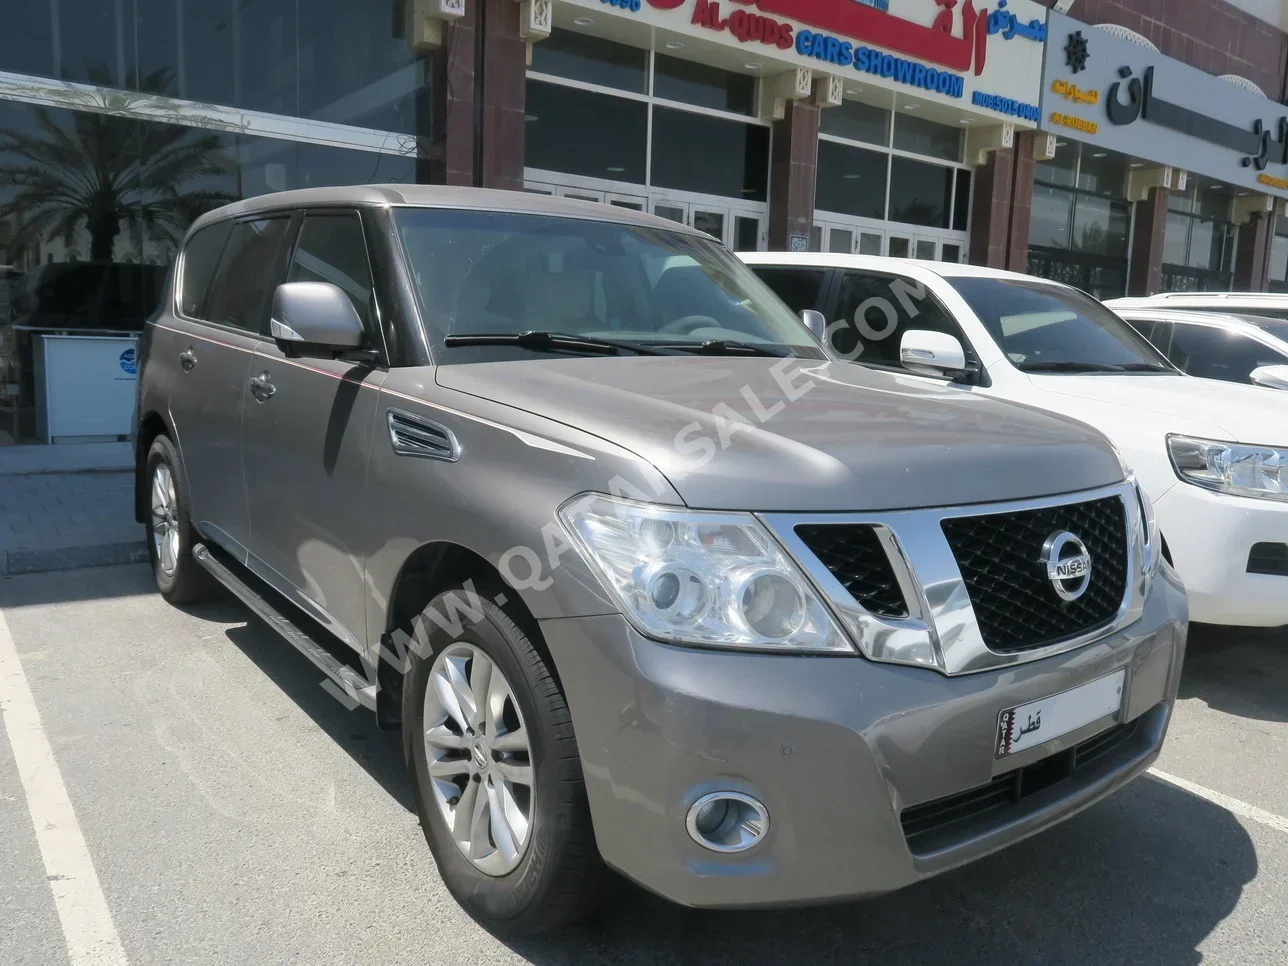 Nissan  Patrol  LE  2010  Automatic  265,000 Km  8 Cylinder  Four Wheel Drive (4WD)  SUV  Gray